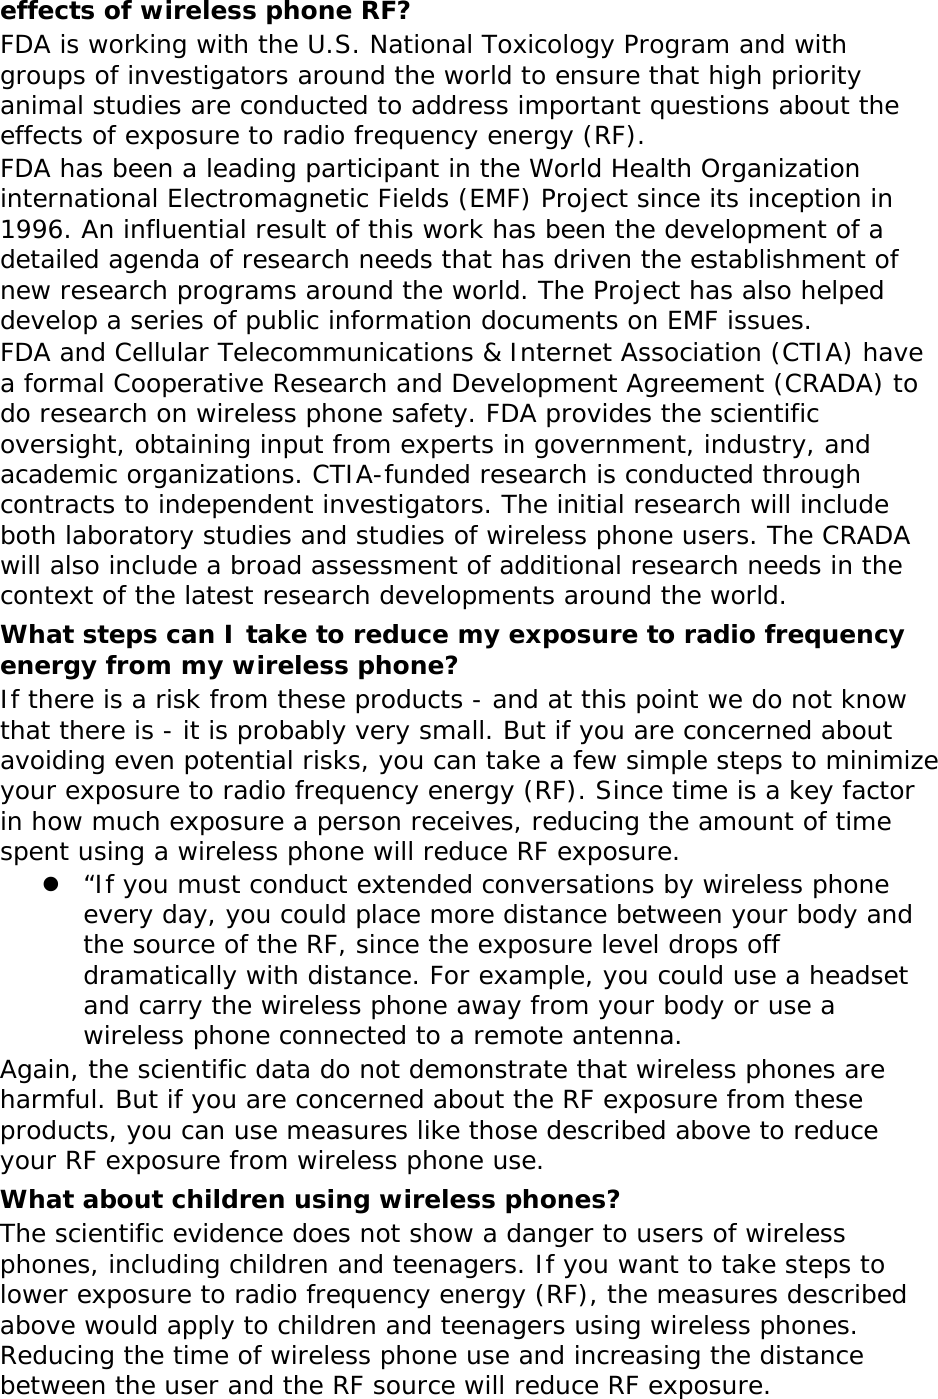 effects of wireless phone RF? FDA is working with the U.S. National Toxicology Program and with groups of investigators around the world to ensure that high priority animal studies are conducted to address important questions about the effects of exposure to radio frequency energy (RF). FDA has been a leading participant in the World Health Organization international Electromagnetic Fields (EMF) Project since its inception in 1996. An influential result of this work has been the development of a detailed agenda of research needs that has driven the establishment of new research programs around the world. The Project has also helped develop a series of public information documents on EMF issues. FDA and Cellular Telecommunications &amp; Internet Association (CTIA) have a formal Cooperative Research and Development Agreement (CRADA) to do research on wireless phone safety. FDA provides the scientific oversight, obtaining input from experts in government, industry, and academic organizations. CTIA-funded research is conducted through contracts to independent investigators. The initial research will include both laboratory studies and studies of wireless phone users. The CRADA will also include a broad assessment of additional research needs in the context of the latest research developments around the world. What steps can I take to reduce my exposure to radio frequency energy from my wireless phone? If there is a risk from these products - and at this point we do not know that there is - it is probably very small. But if you are concerned about avoiding even potential risks, you can take a few simple steps to minimize your exposure to radio frequency energy (RF). Since time is a key factor in how much exposure a person receives, reducing the amount of time spent using a wireless phone will reduce RF exposure.  “If you must conduct extended conversations by wireless phone every day, you could place more distance between your body and the source of the RF, since the exposure level drops off dramatically with distance. For example, you could use a headset and carry the wireless phone away from your body or use a wireless phone connected to a remote antenna. Again, the scientific data do not demonstrate that wireless phones are harmful. But if you are concerned about the RF exposure from these products, you can use measures like those described above to reduce your RF exposure from wireless phone use. What about children using wireless phones? The scientific evidence does not show a danger to users of wireless phones, including children and teenagers. If you want to take steps to lower exposure to radio frequency energy (RF), the measures described above would apply to children and teenagers using wireless phones. Reducing the time of wireless phone use and increasing the distance between the user and the RF source will reduce RF exposure. 